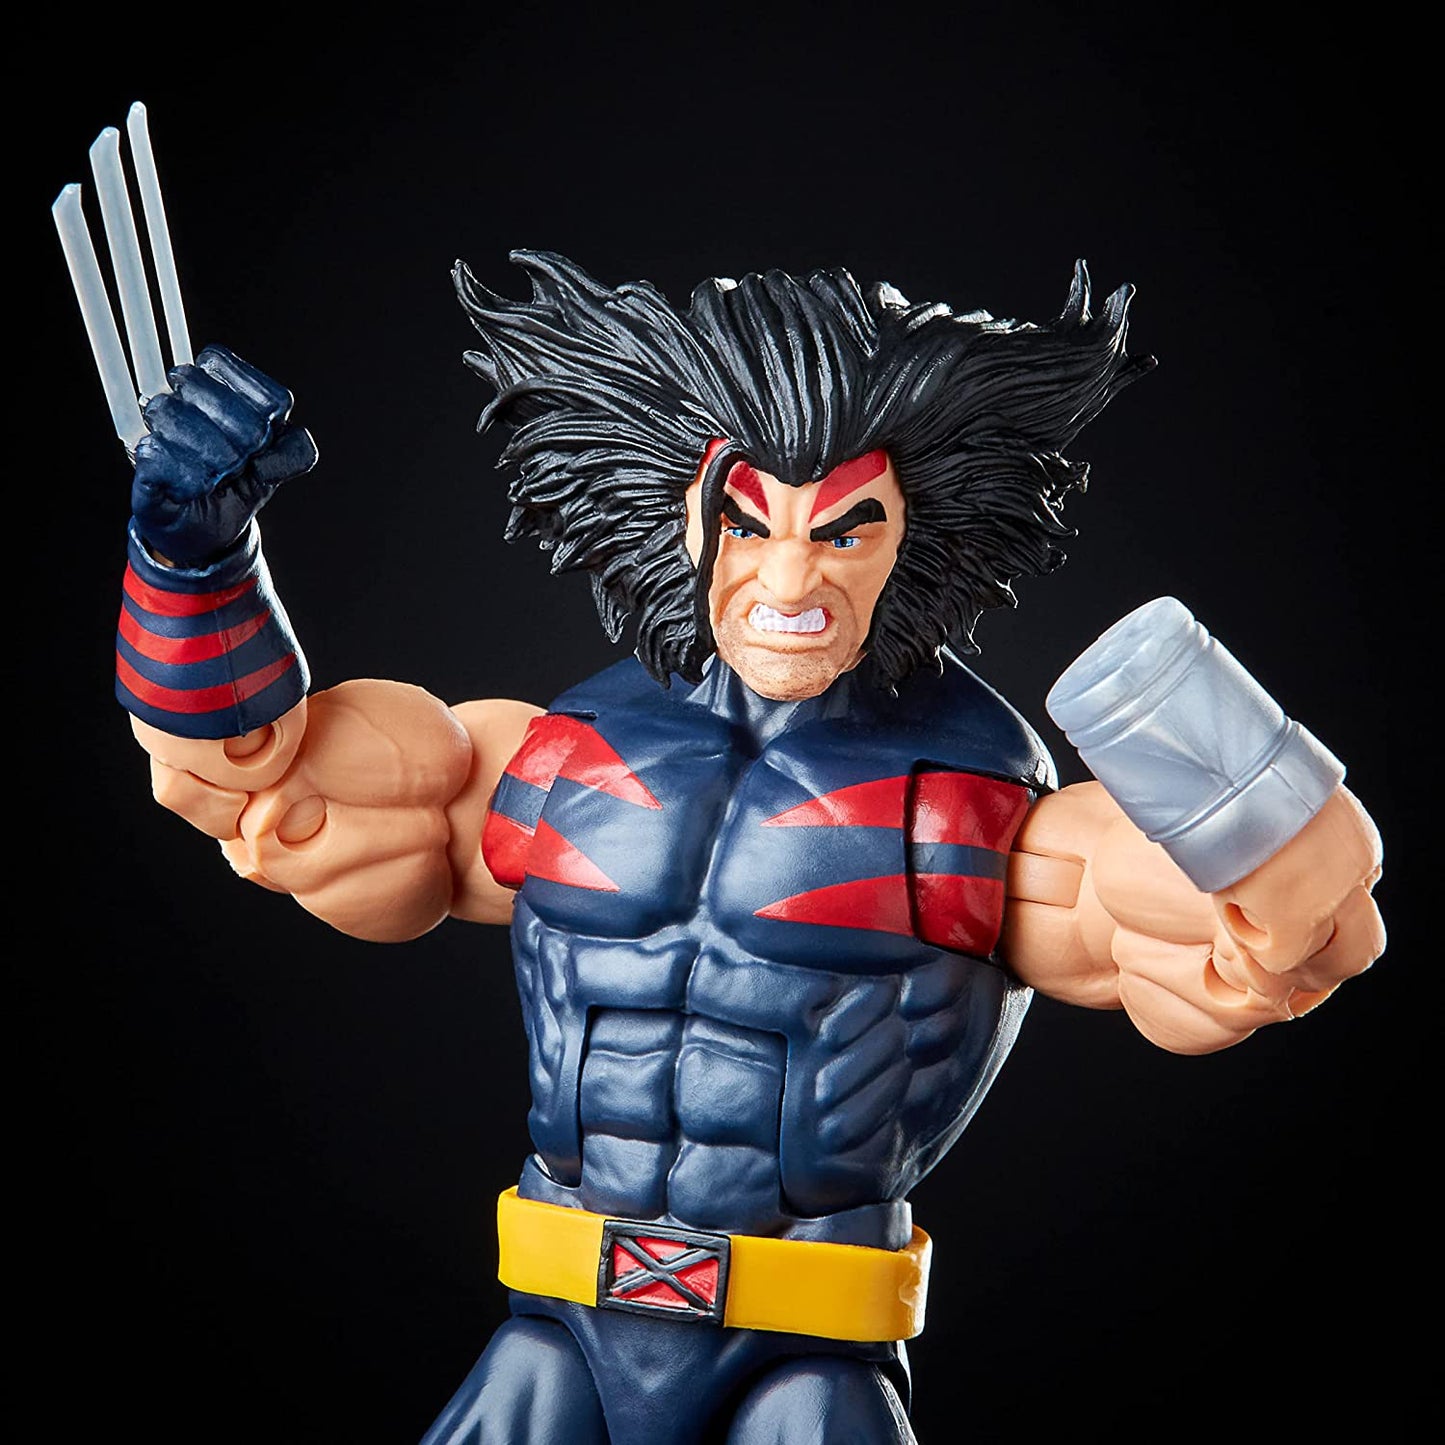 Hasbro Marvel Legends Series 6-inch Collectible Weapon X Action Figure Toy X-Men: Age of Apocalypse Collection